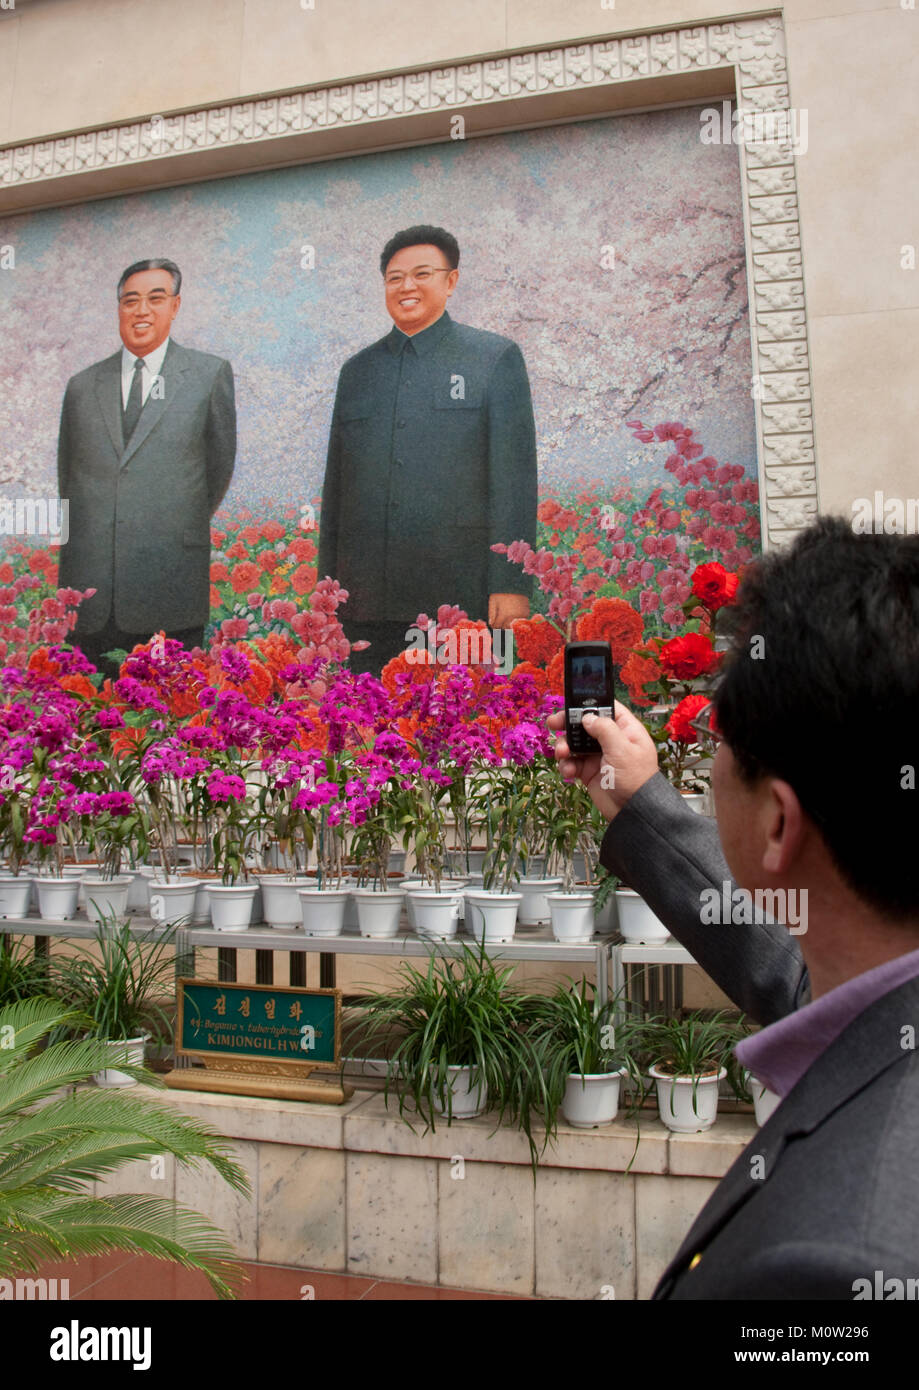 North Korean man taking a picture with his mobile phone at Kimilsungia and Kimjongilia exhibition, Pyongan Province, Pyongyang, North Korea Stock Photo